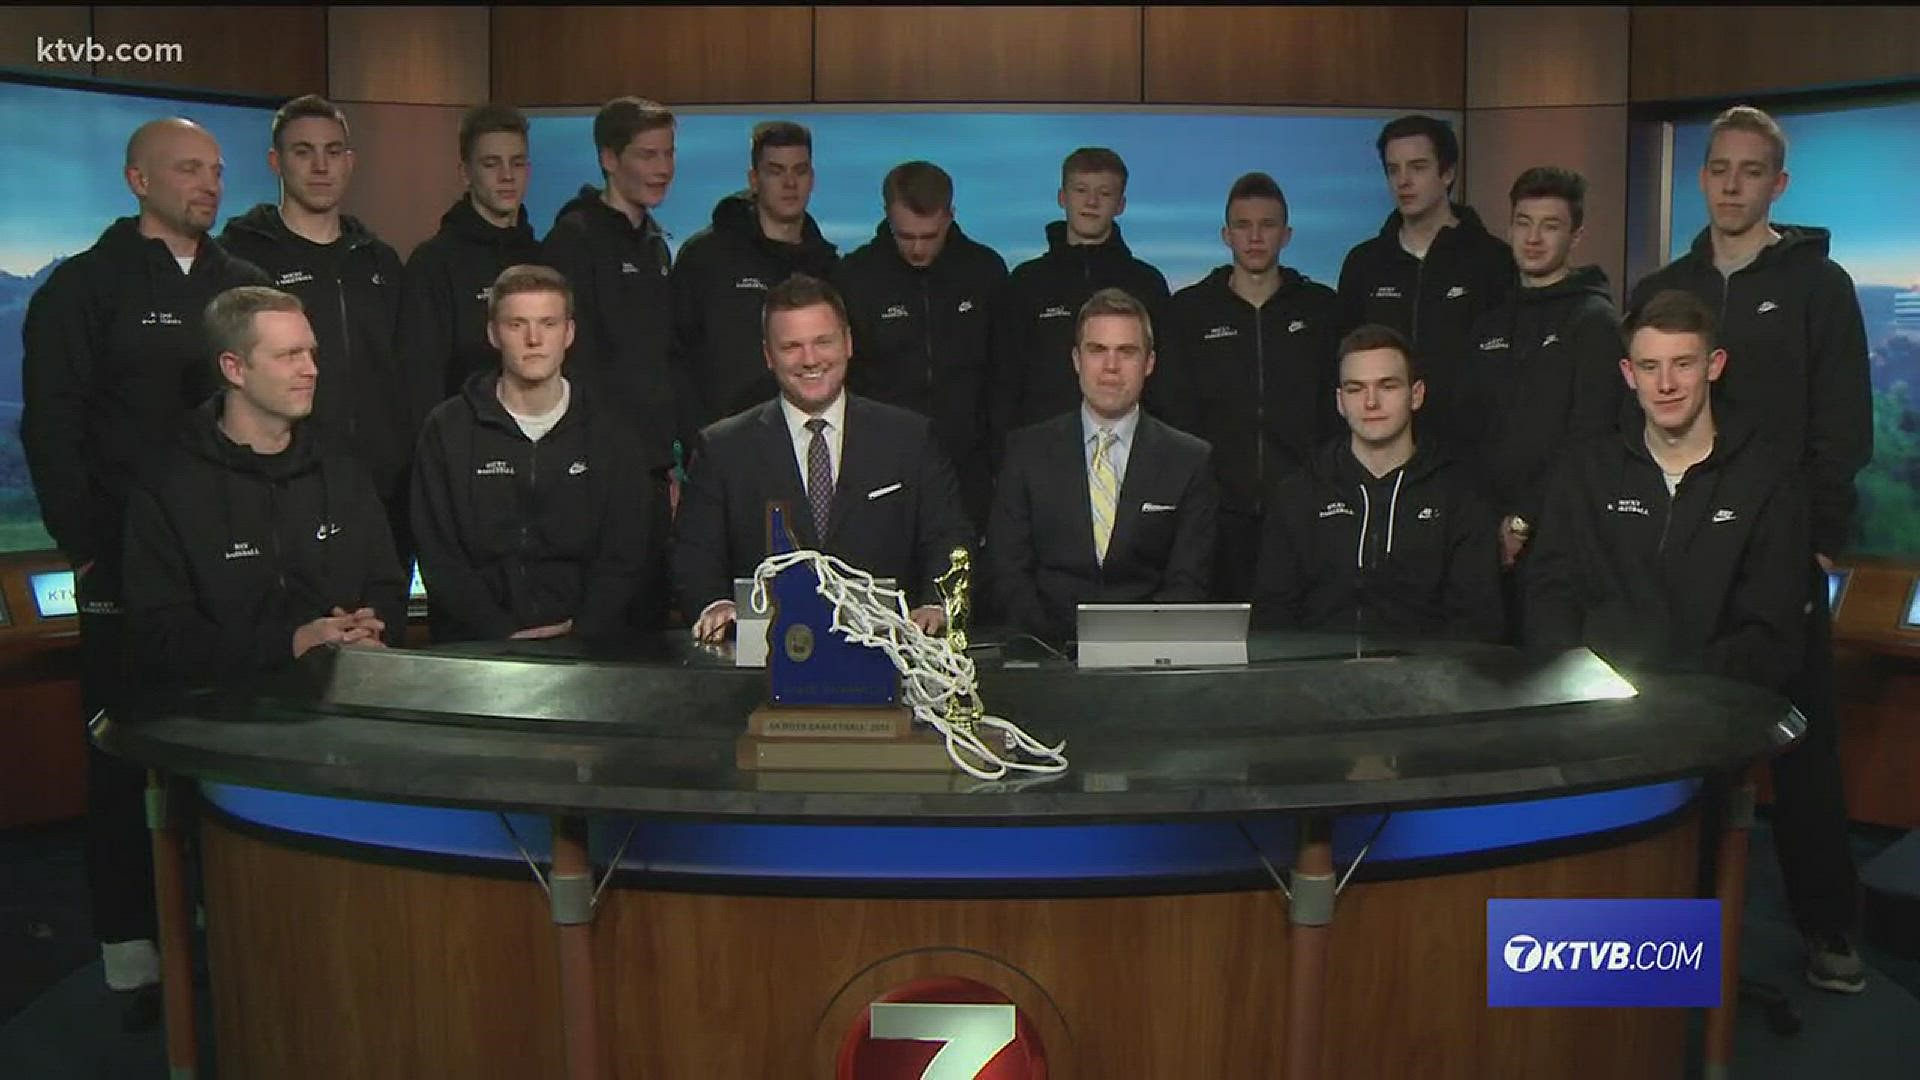 The Rocky Mountain boys basketball team joined Jay Tust and Will Hall in studio after winning their second consecutive 5A state basketball championship.